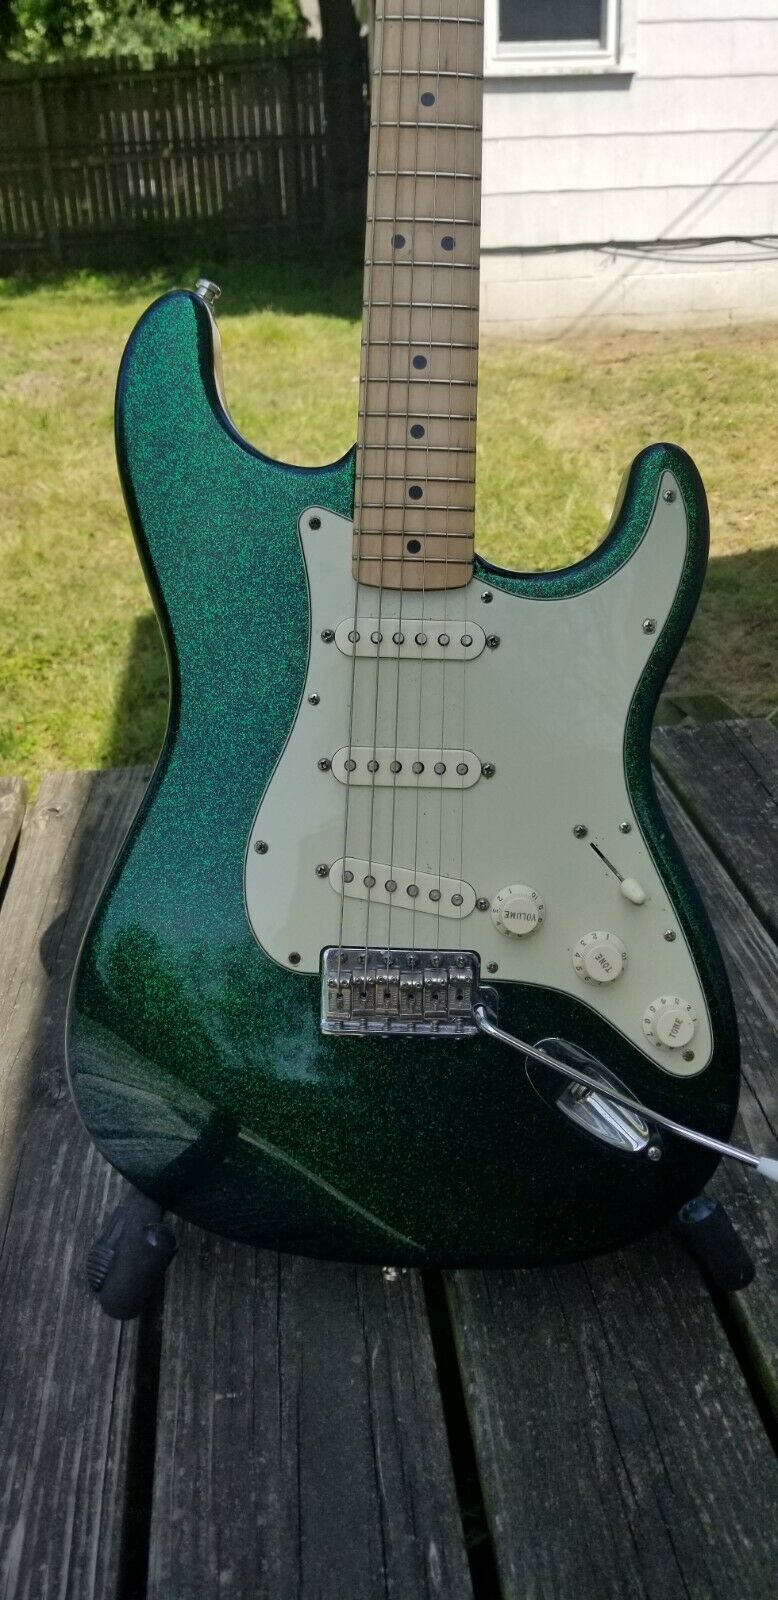 Limited Edition Flip Flop Green Blue Standard Stratocaster body